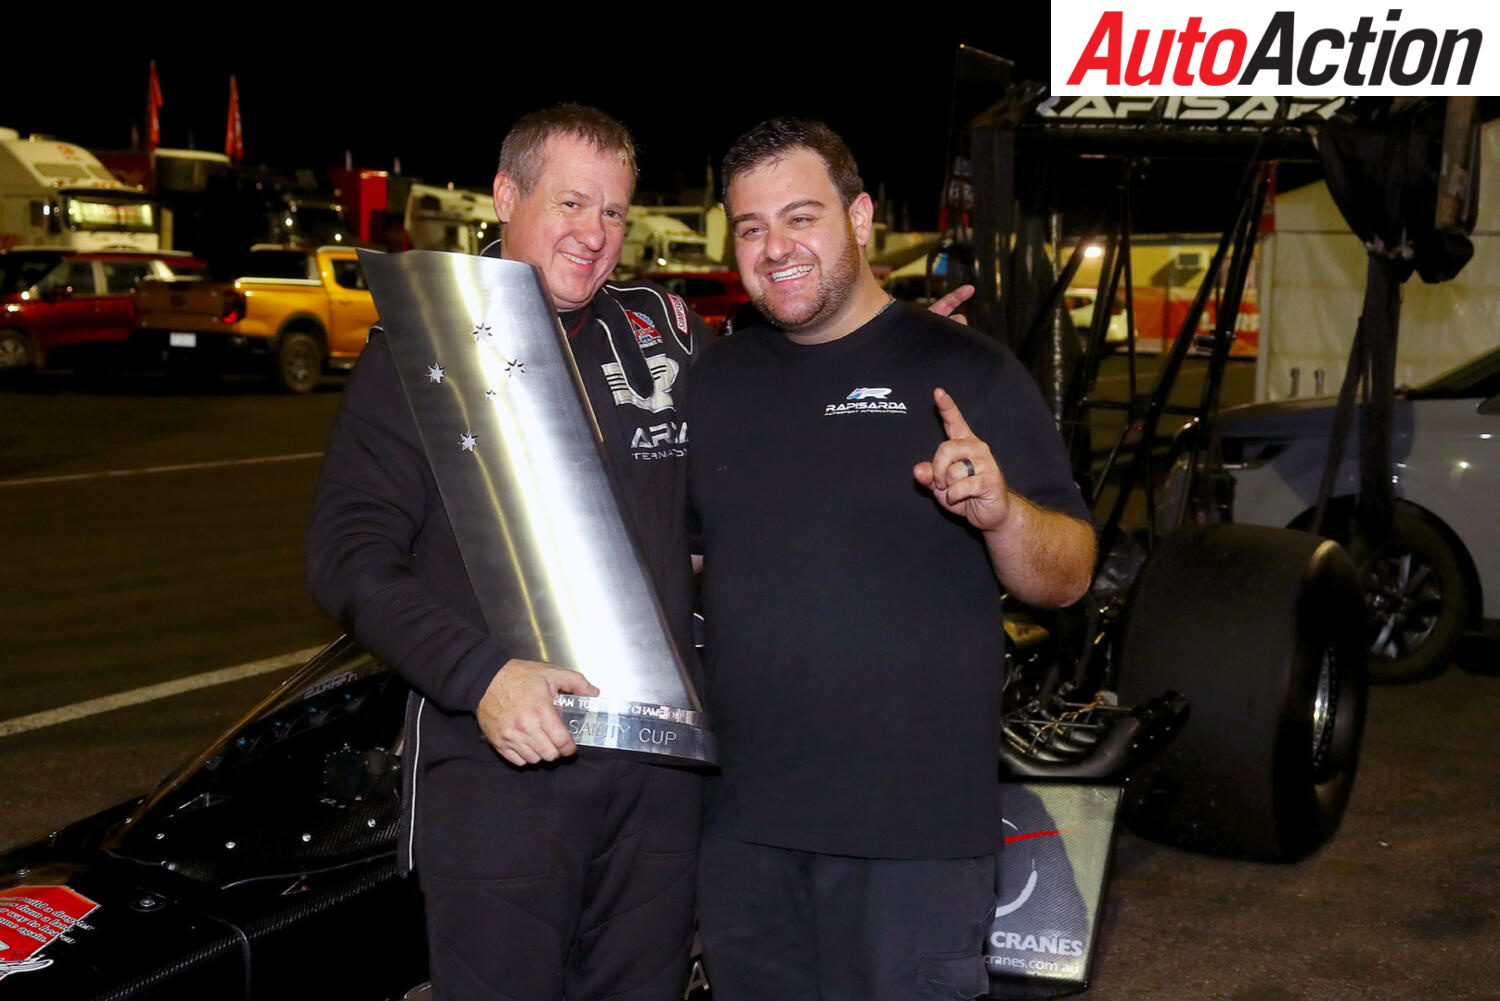 Harris “lost for words” after Top Fuel title